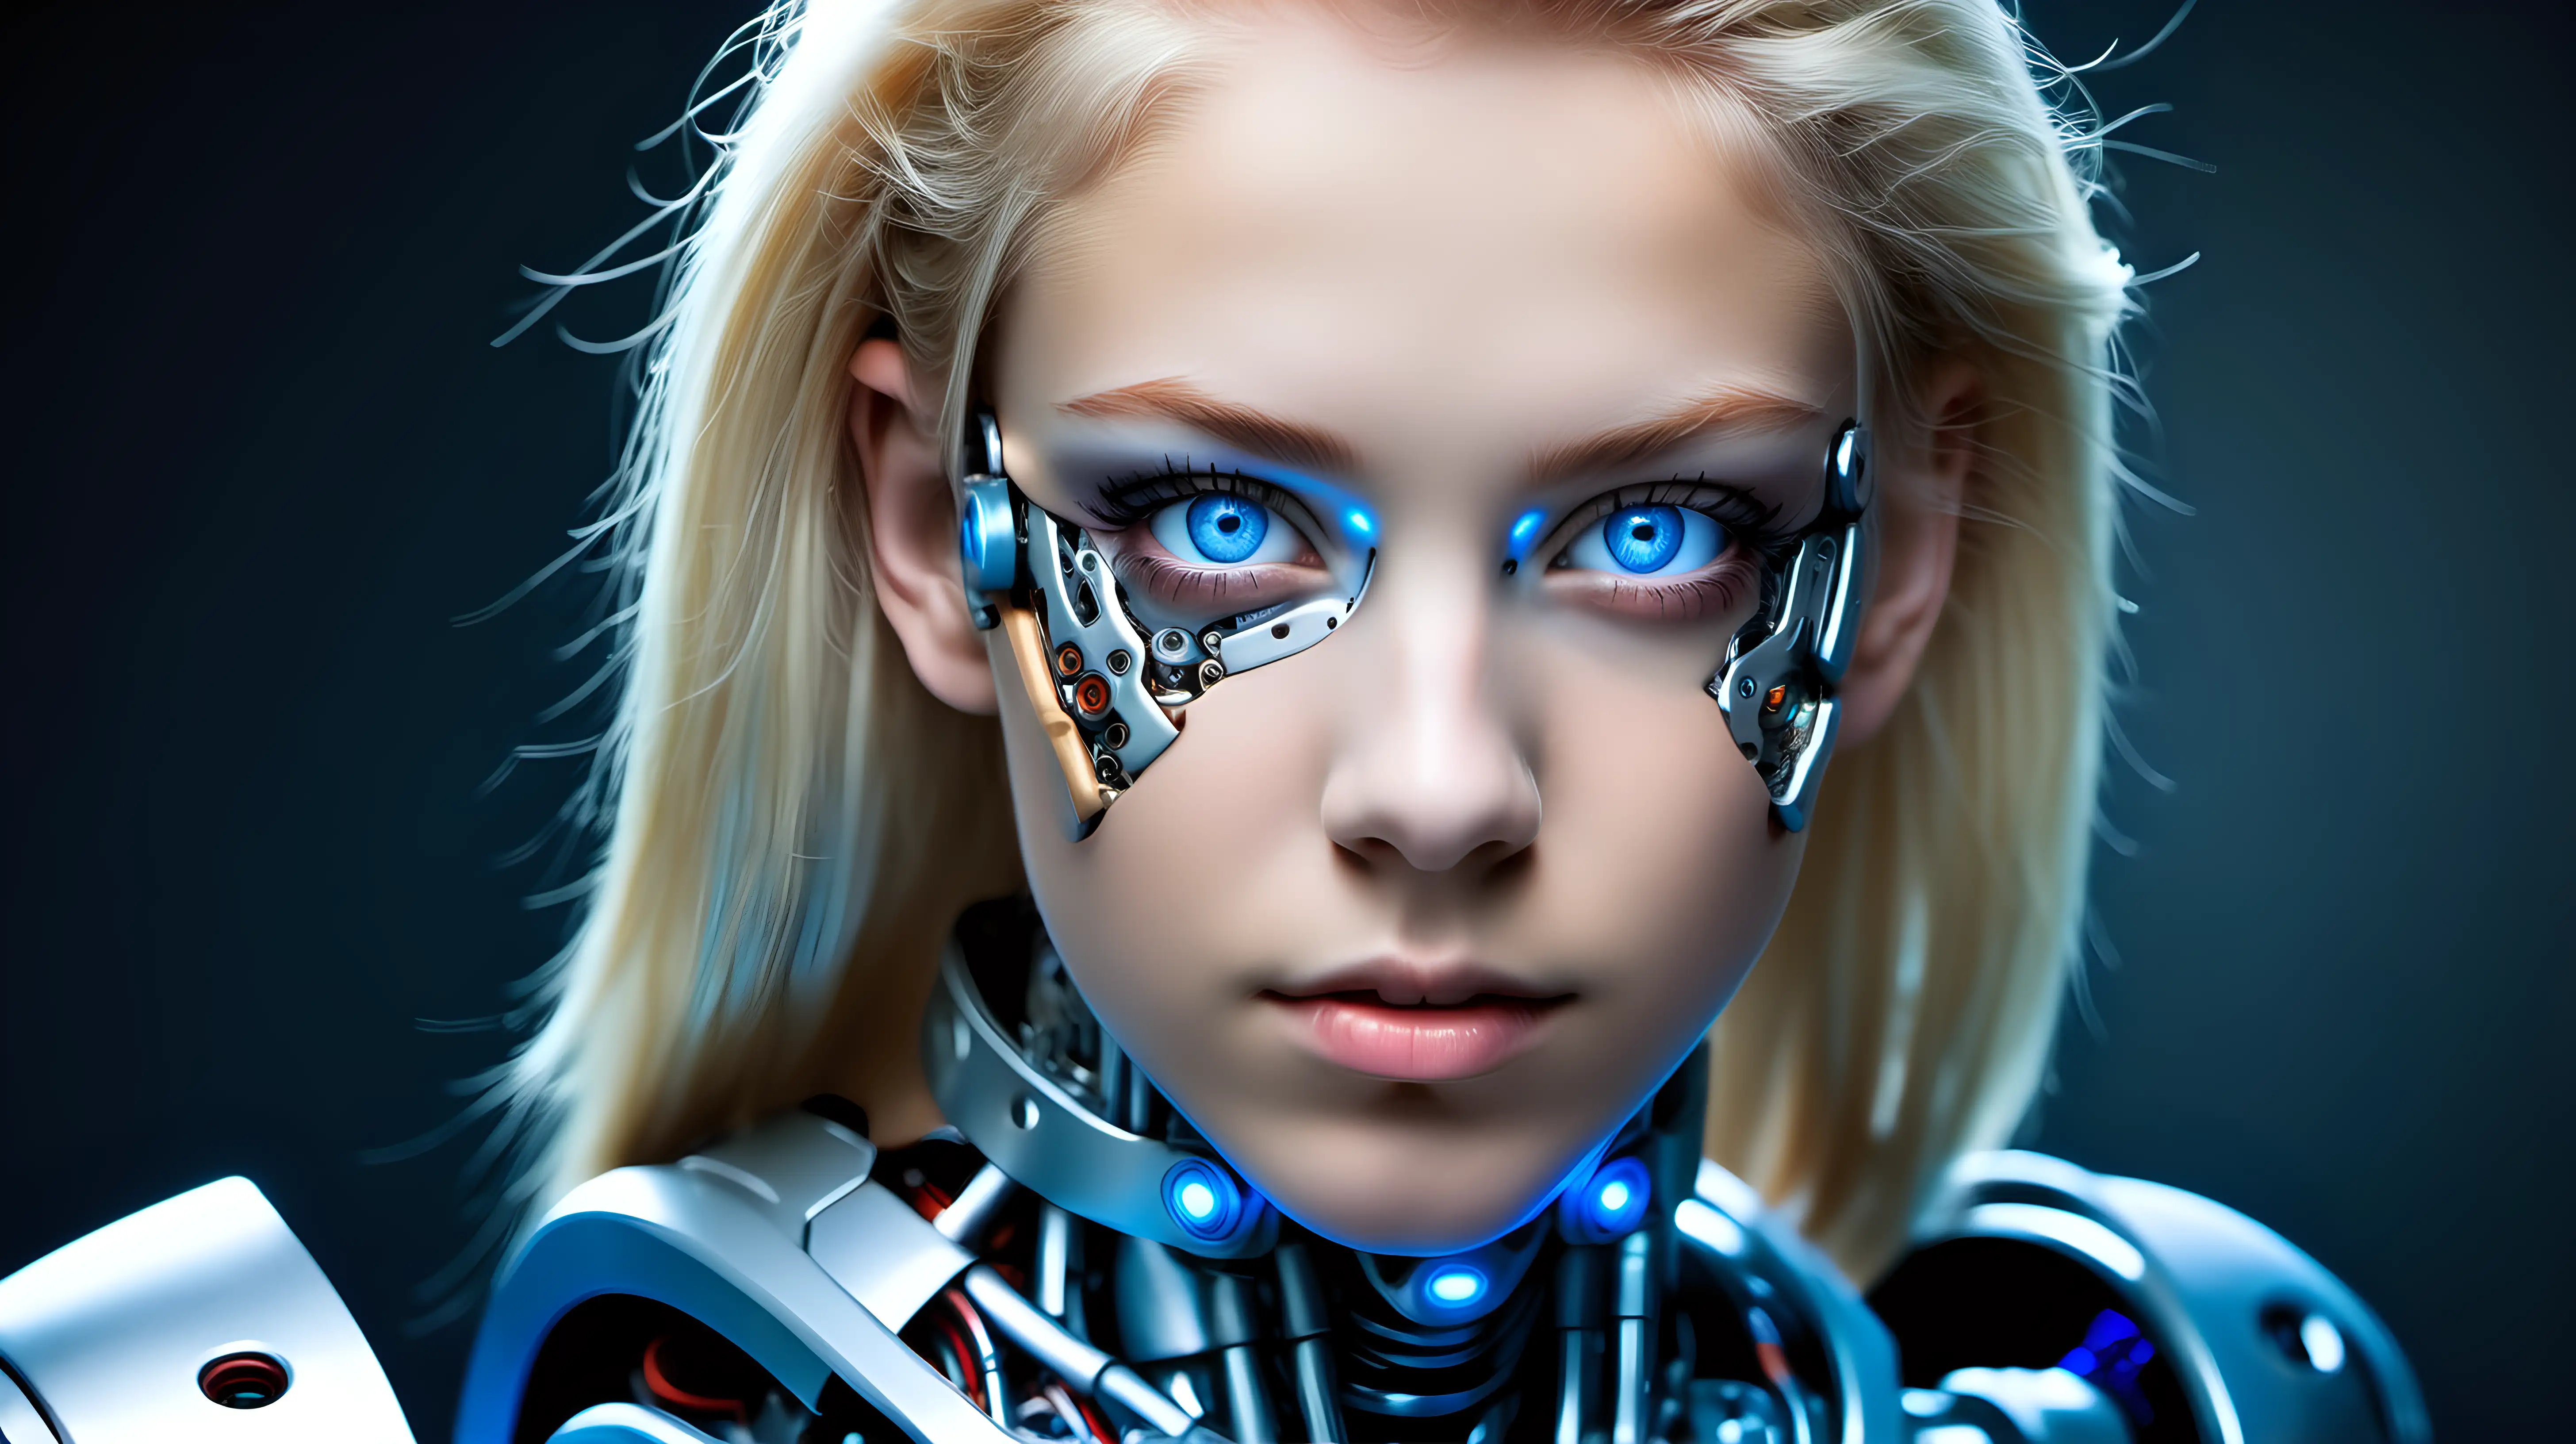 Beautiful Cyborg Woman with Blonde Hair and Blue Eyes HyperRealistic Portrait